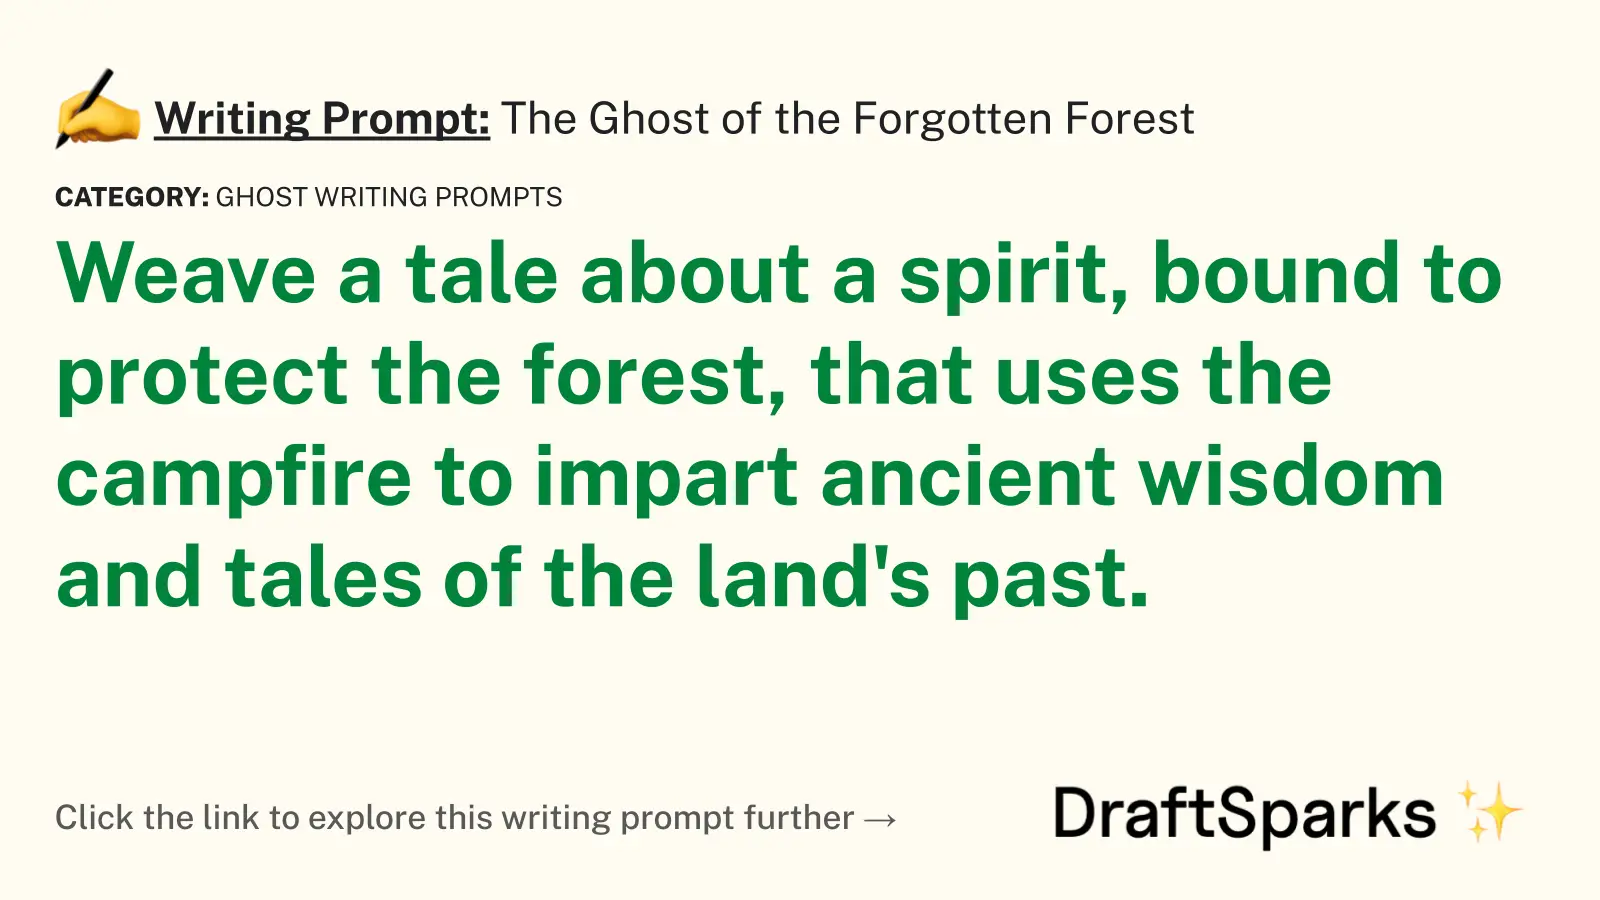 The Ghost of the Forgotten Forest